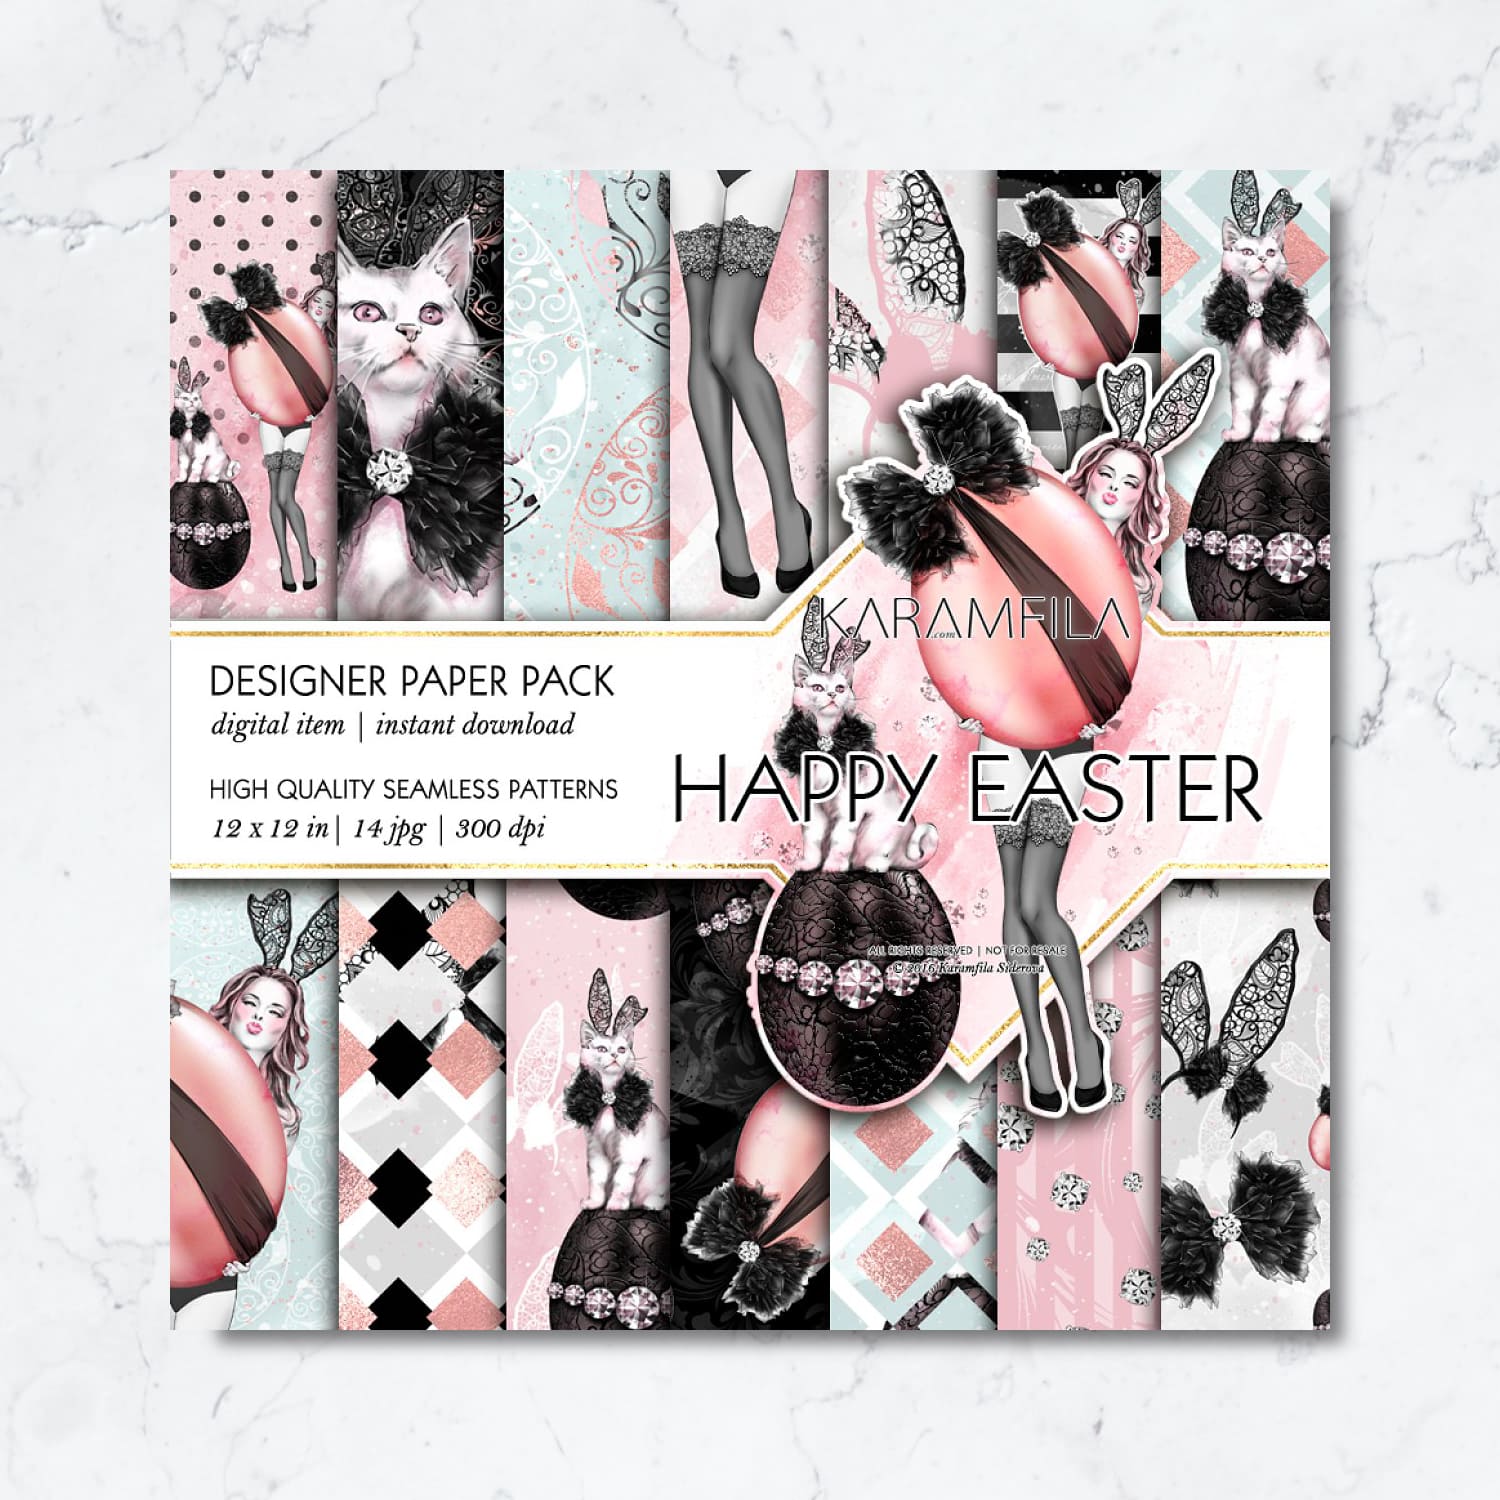 Happy Easter Seamless Patterns cover.